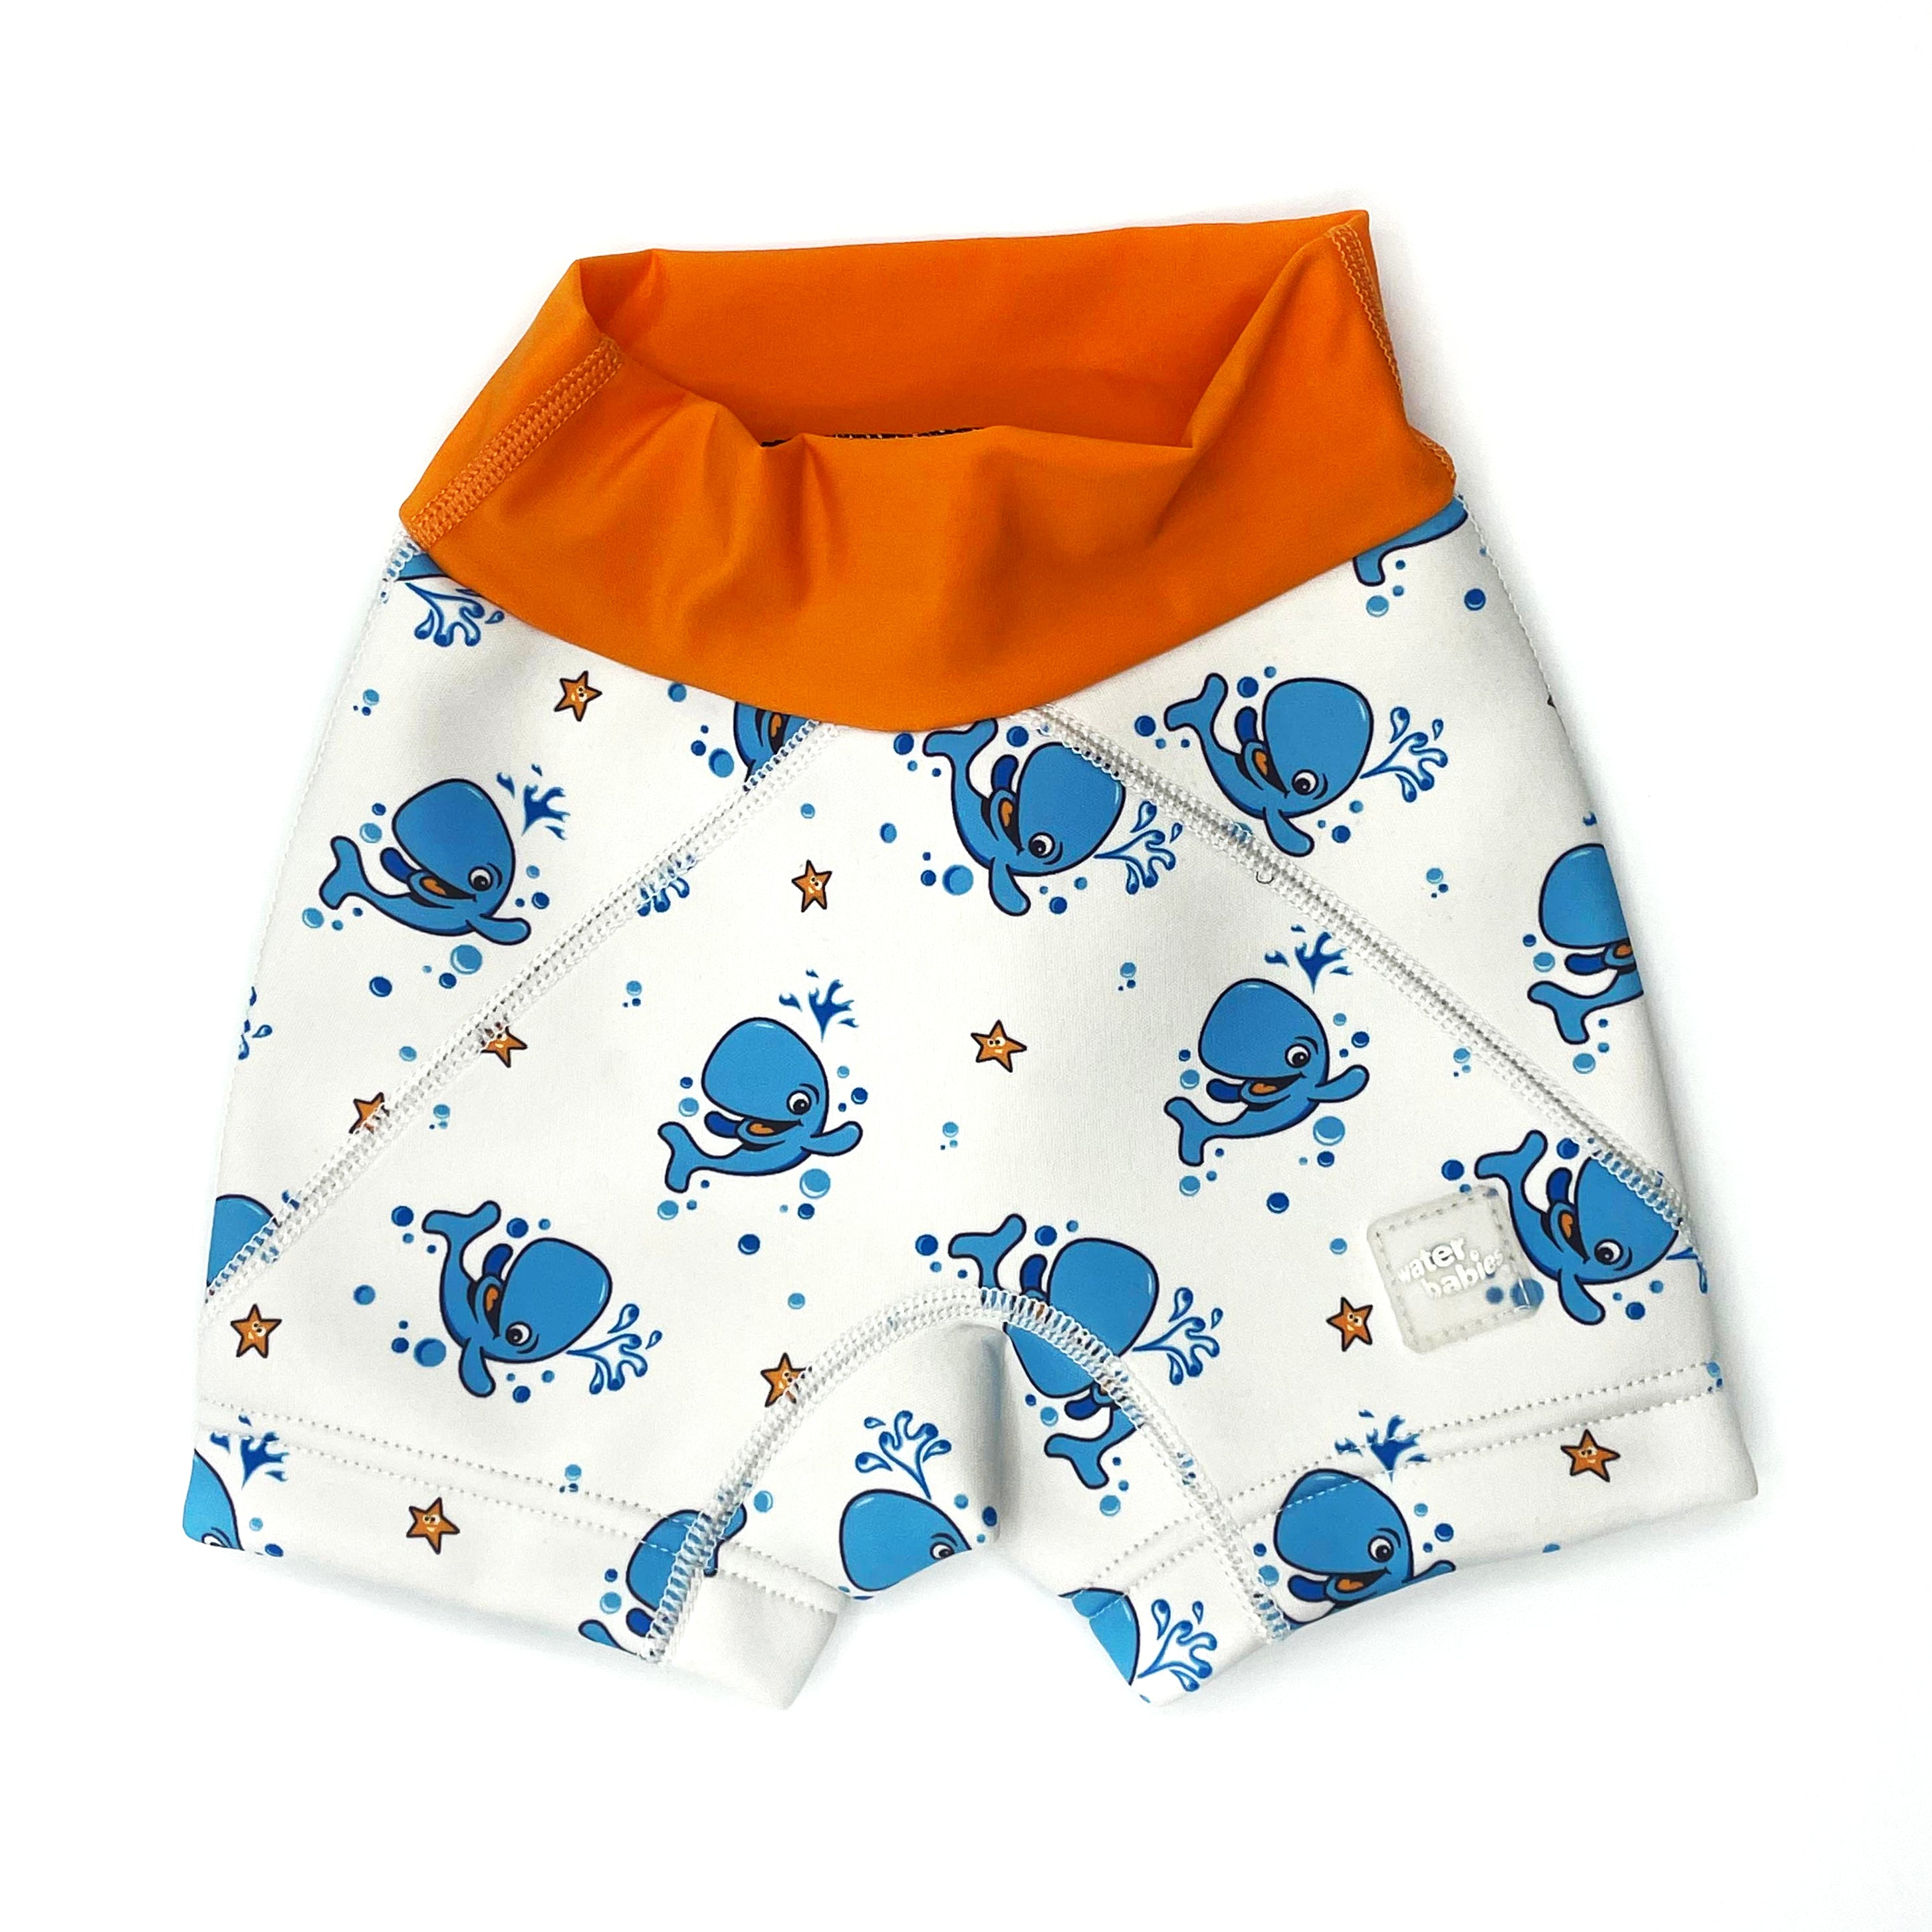  Splash About Toddler Jammers : Clothing, Shoes & Jewelry